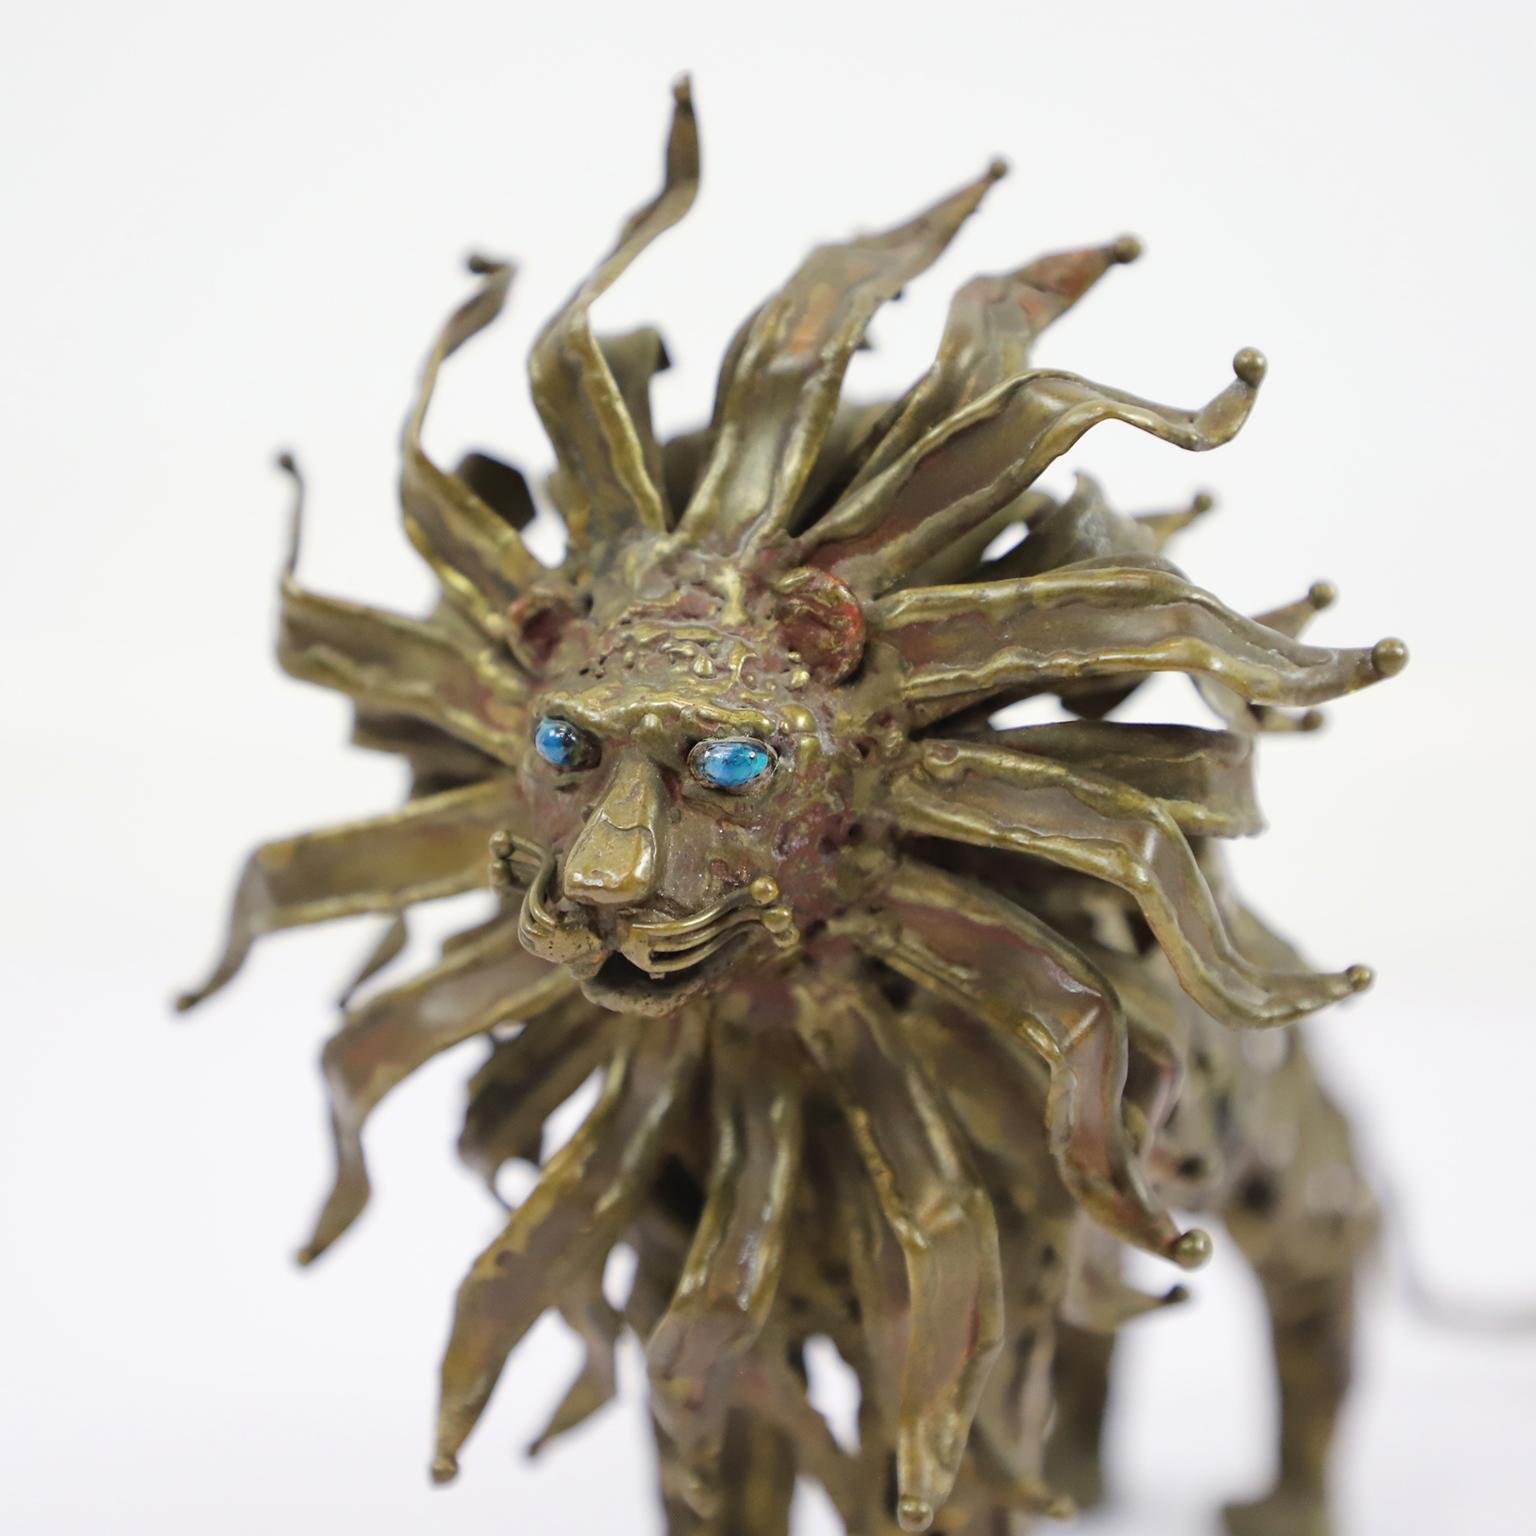 Circa 1970. We offer this Pal Kepenyes Lion Steel and Bronze Sculpture eyes made in semi-precious stone. 
Pal Kepenyes was a Hungarian artist and jewelry designer known for his unique and innovative designs. He was born in Budapest in 1926 and began